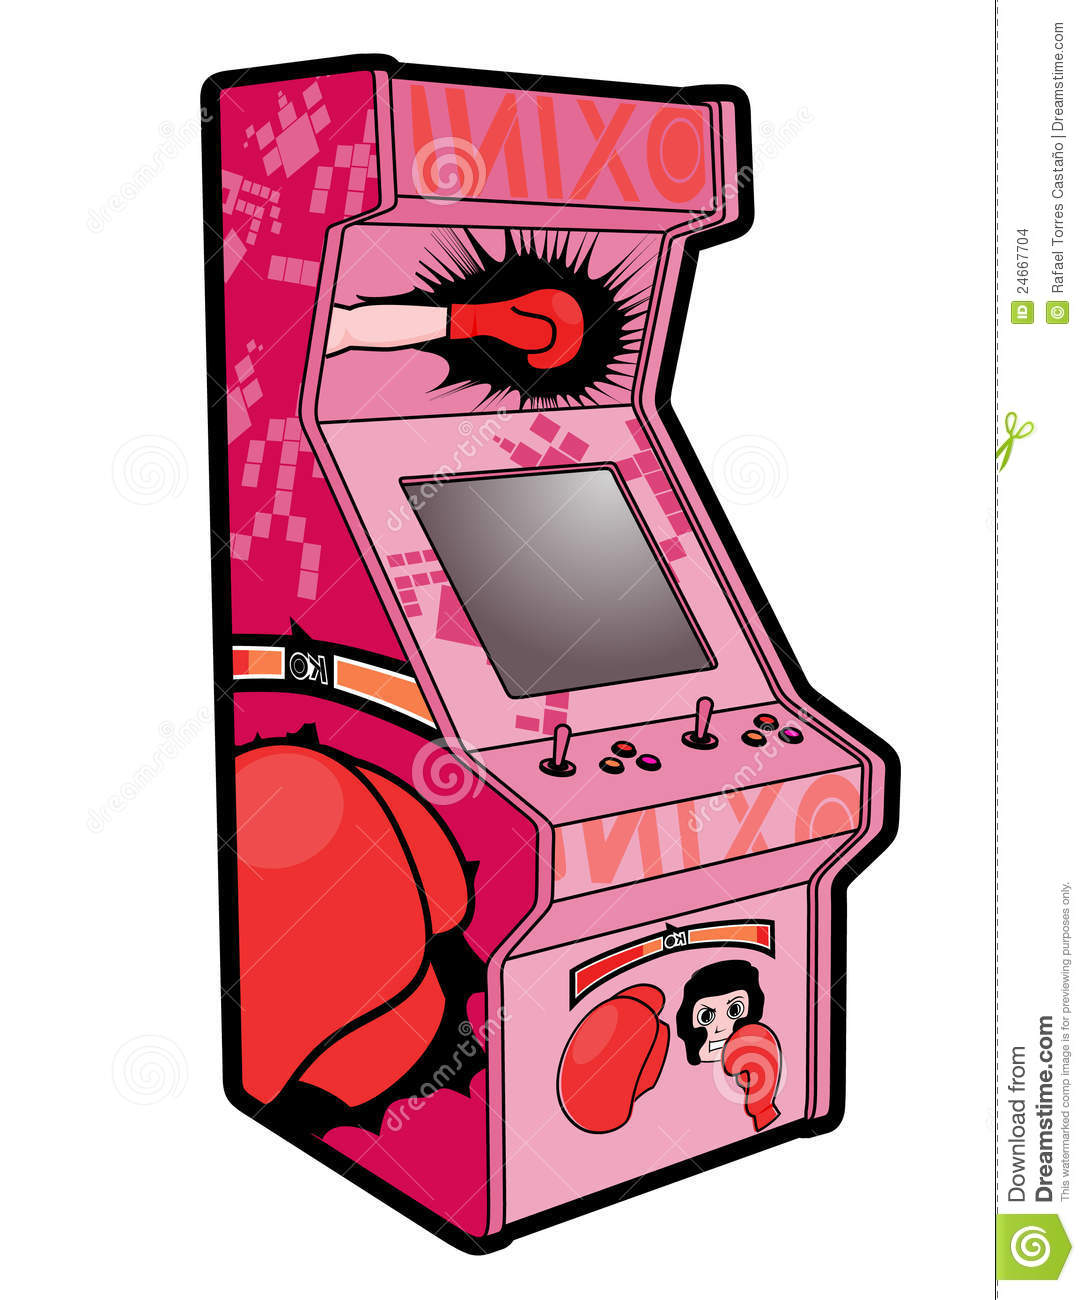 Our great arcade game machine